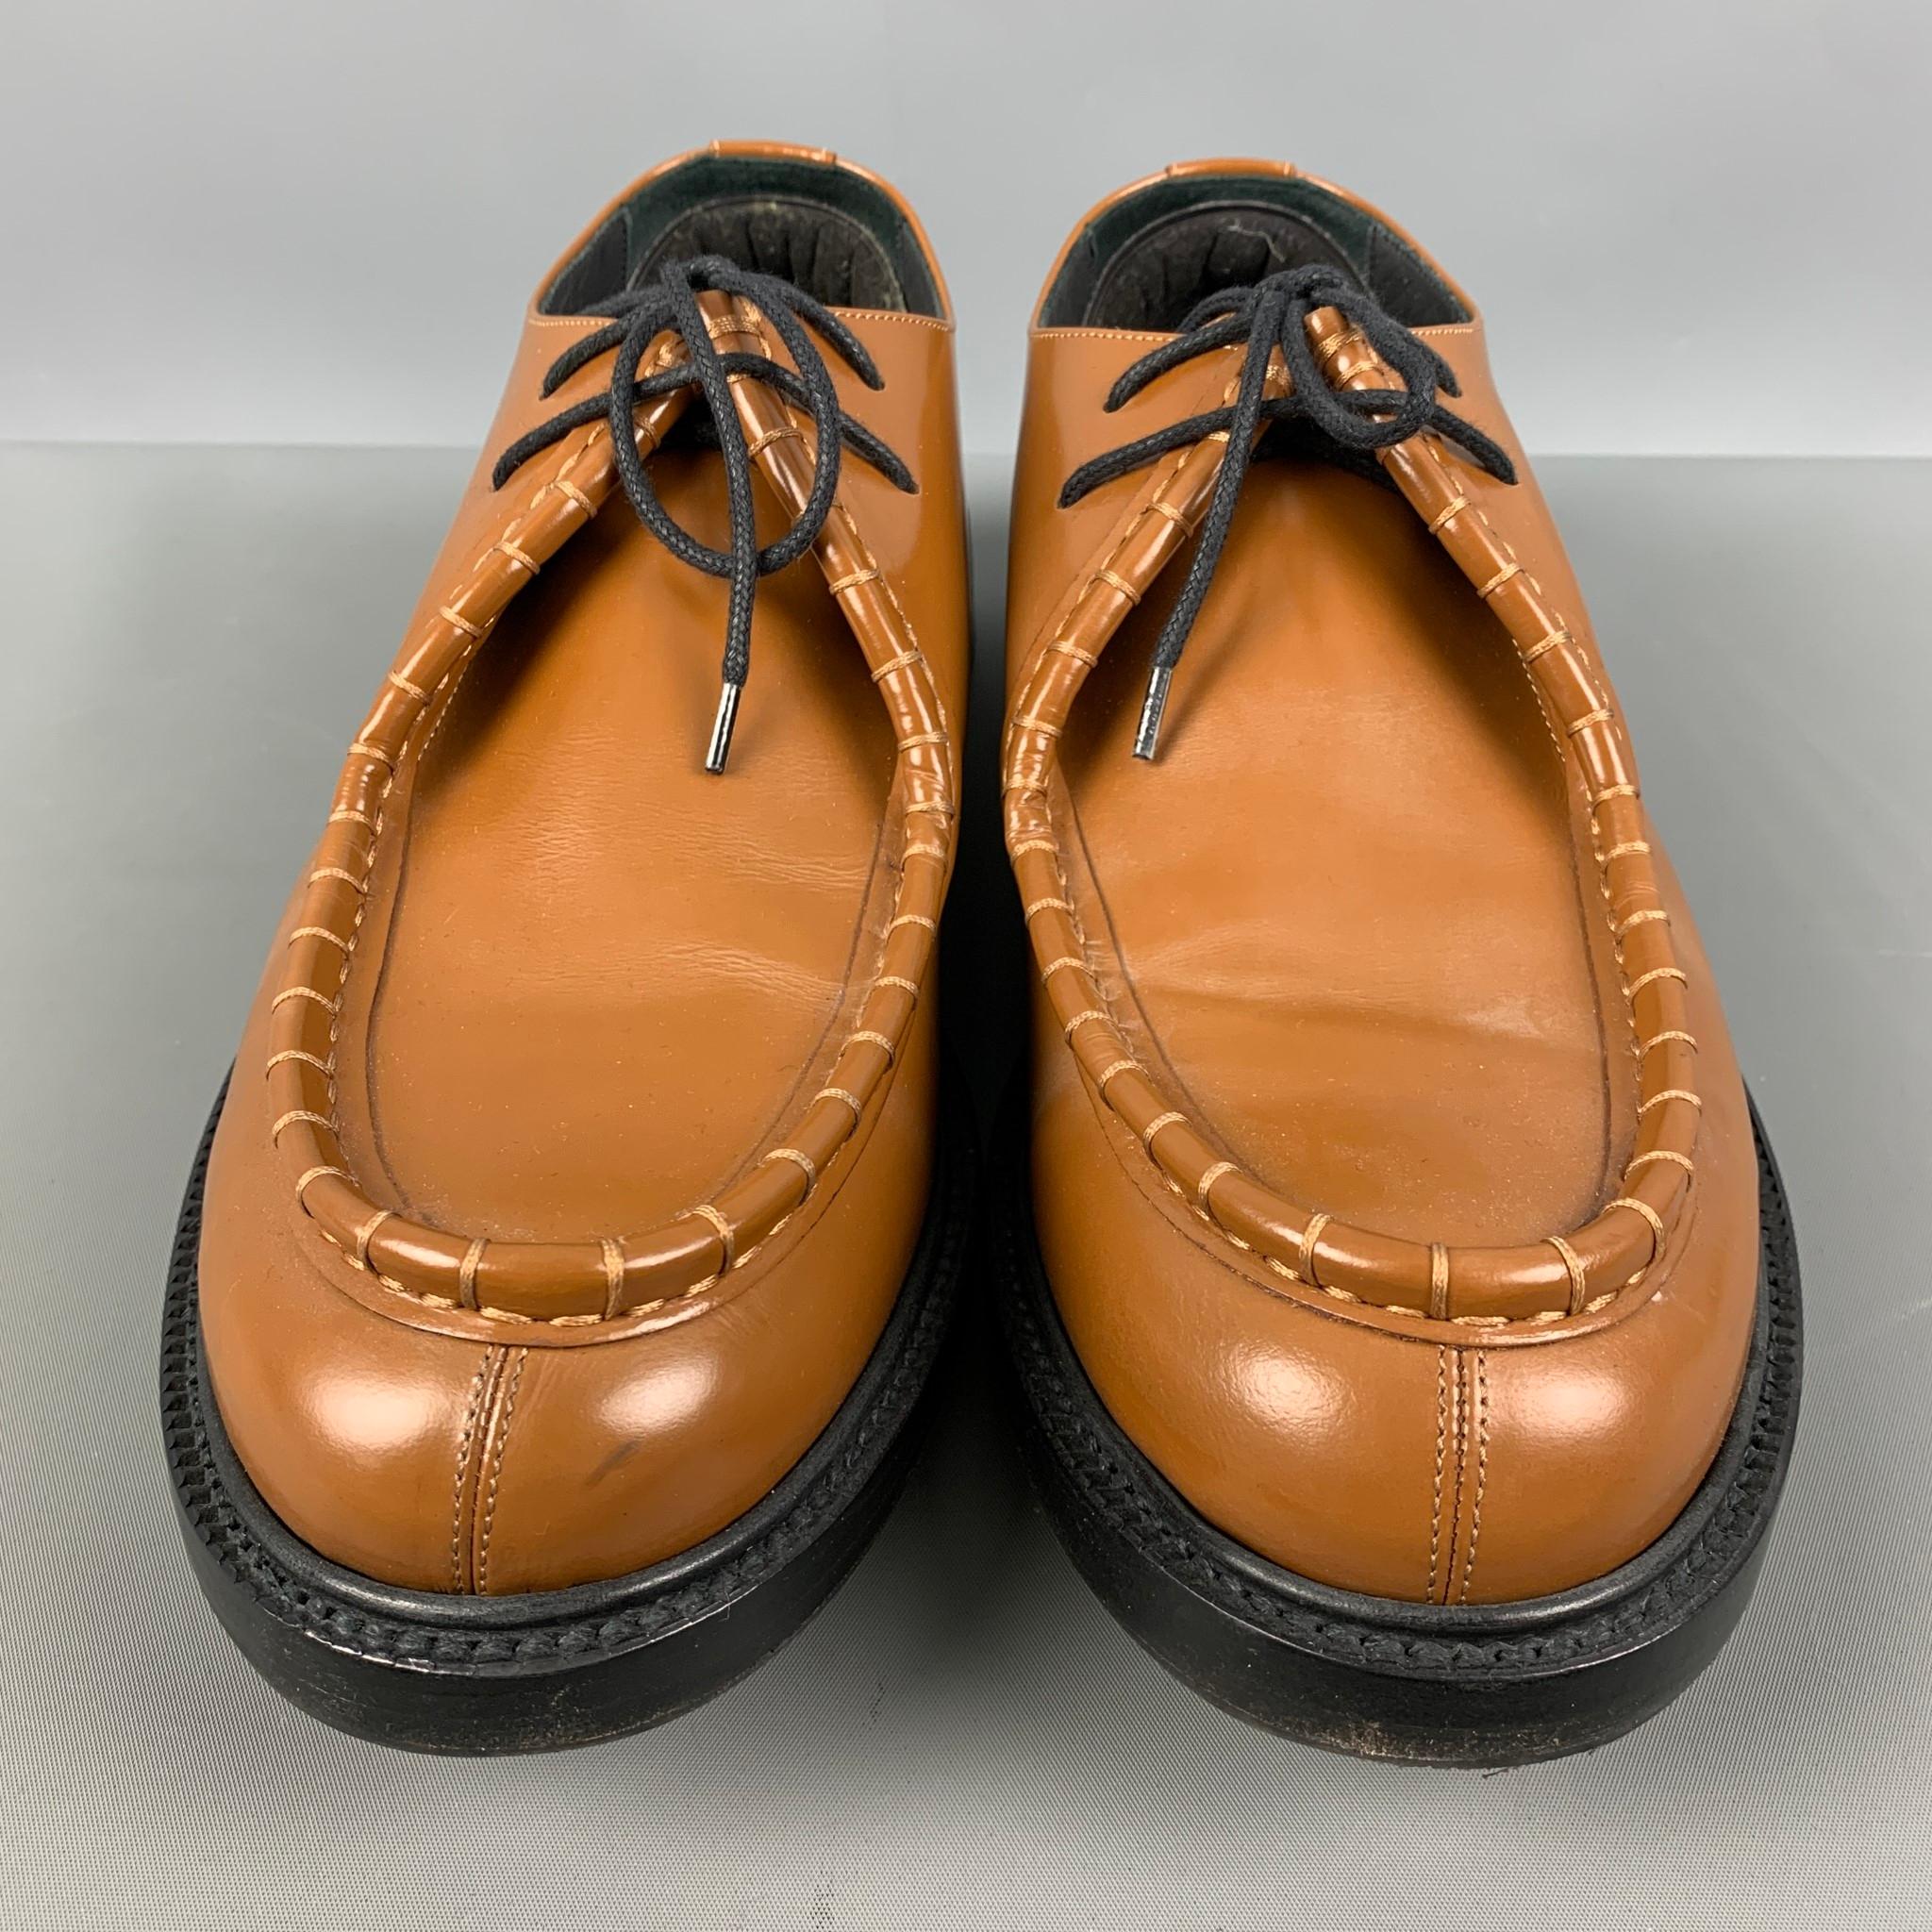 CALVIN KLEIN 205W39NYC Size 9.5 Tan Solid Leather Lace Up Shoes 1